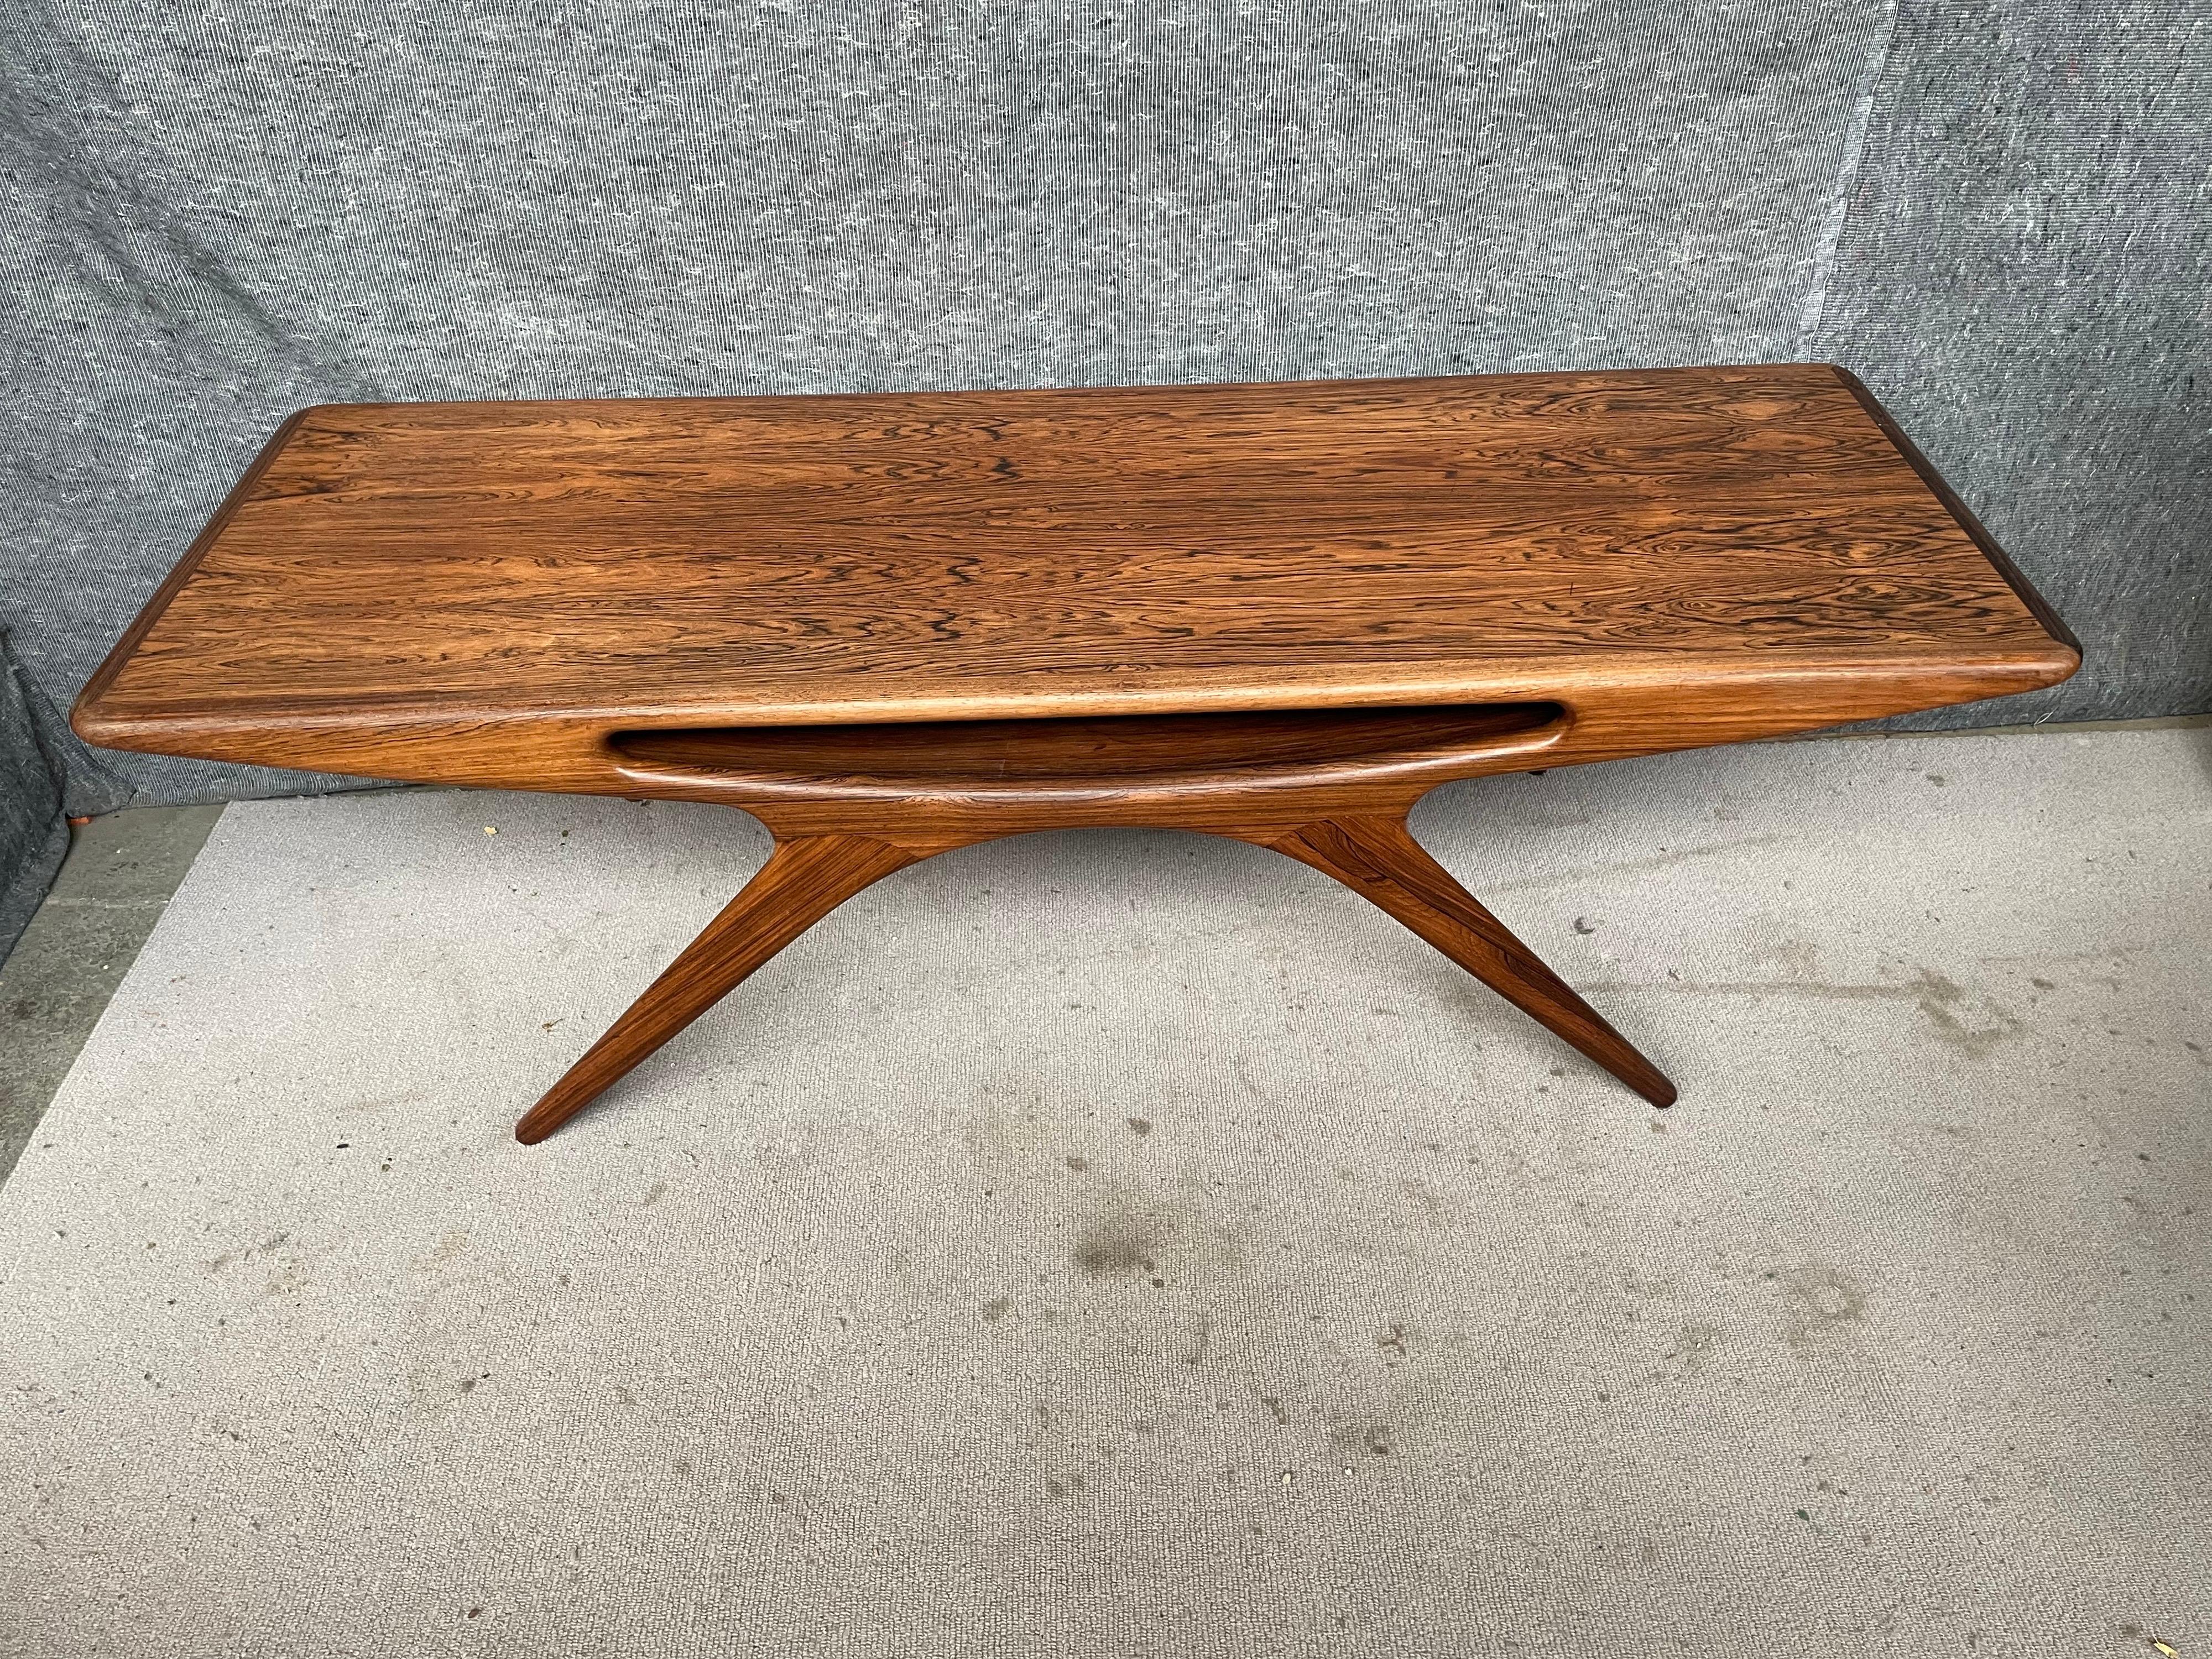 1960´s Smile table, Smilebordet, UFO table or Smiling table designed by Johannes Andersen. Produced by CFC Silkeborg in Denmark. A triumph of Johannes Andersen design, rarely seen in rosewood - definitely a collectors item. The design succeeds as